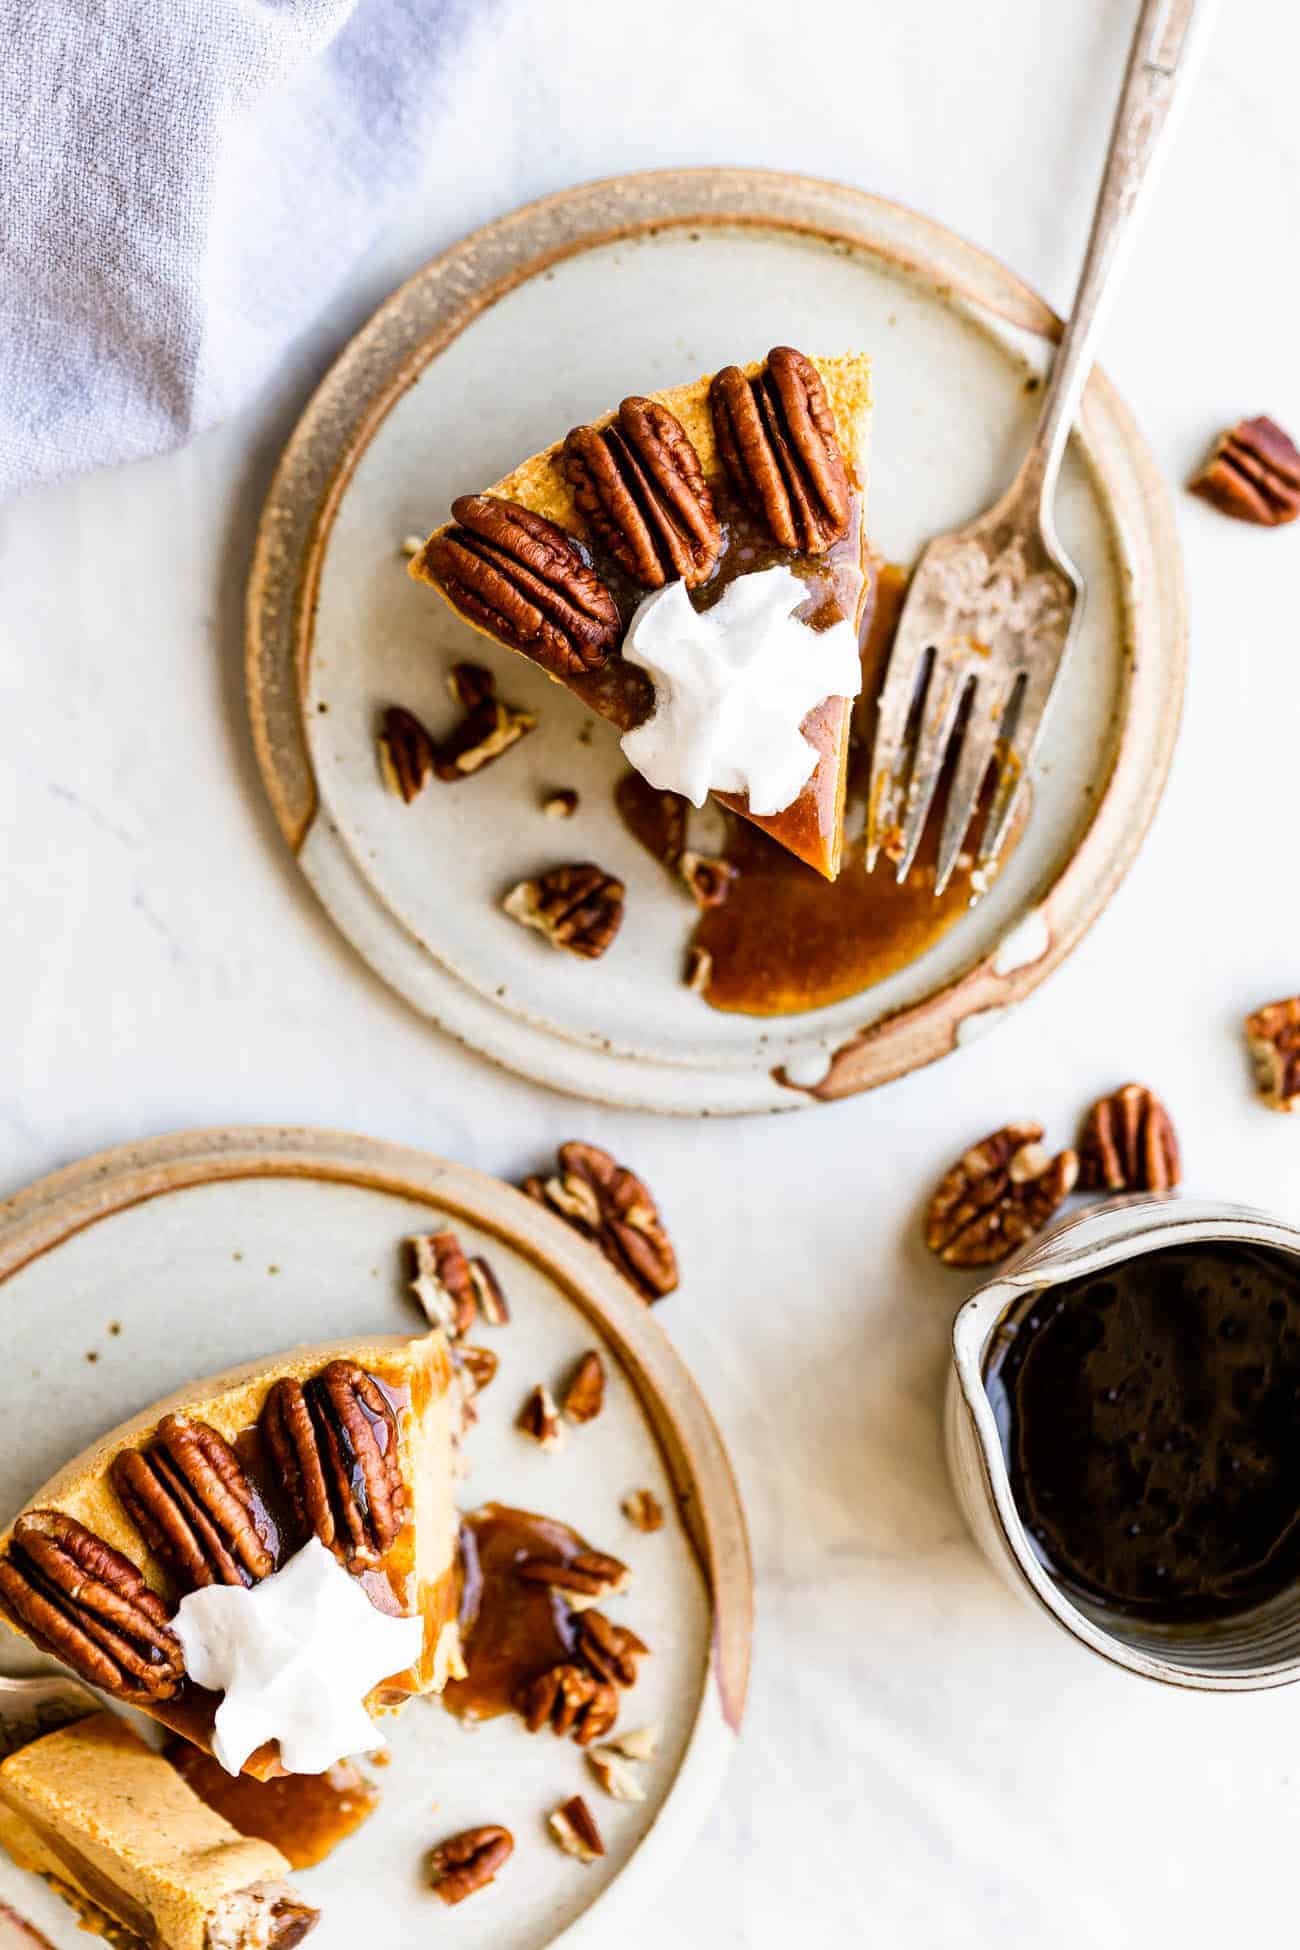 two slices of pumpkin cheesecake on plates with whipped cream and pecans